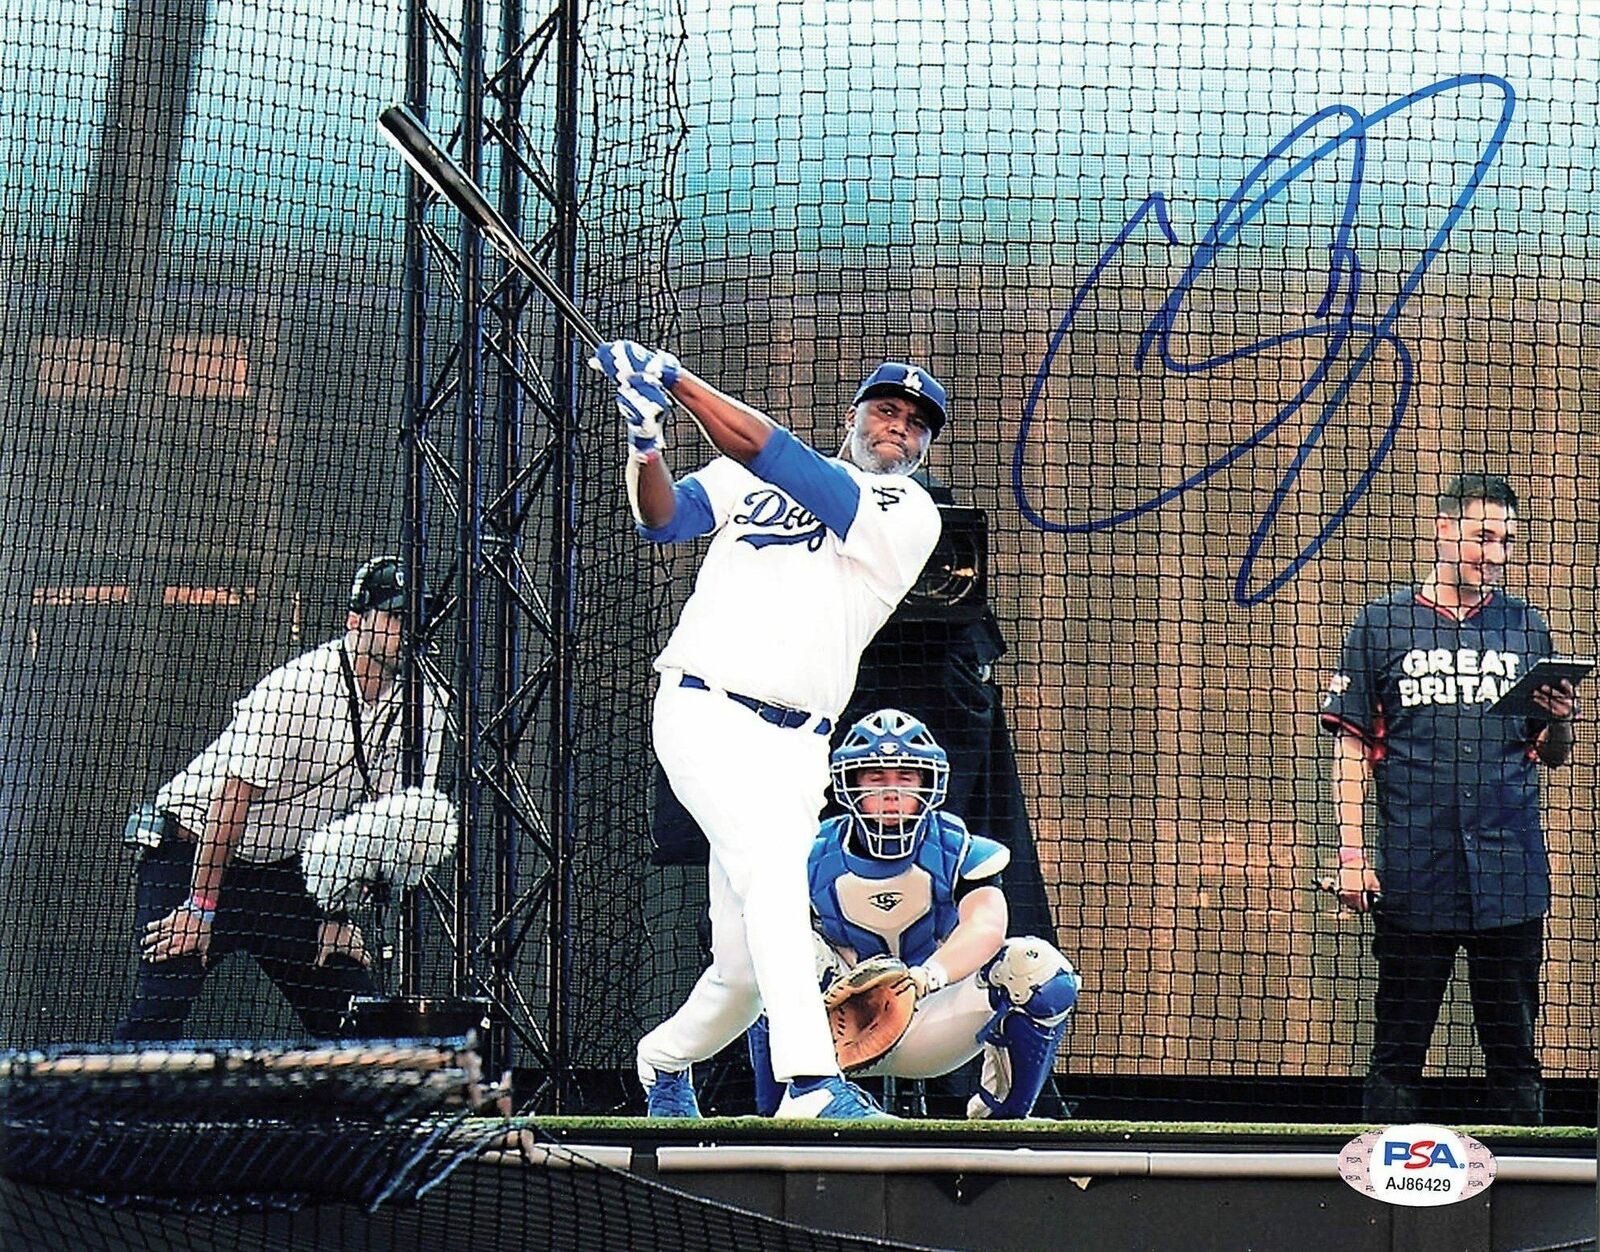 CLIFF FLOYD signed 8x10 Photo Poster painting PSA/DNA Los Angeles Dodgers Autographed